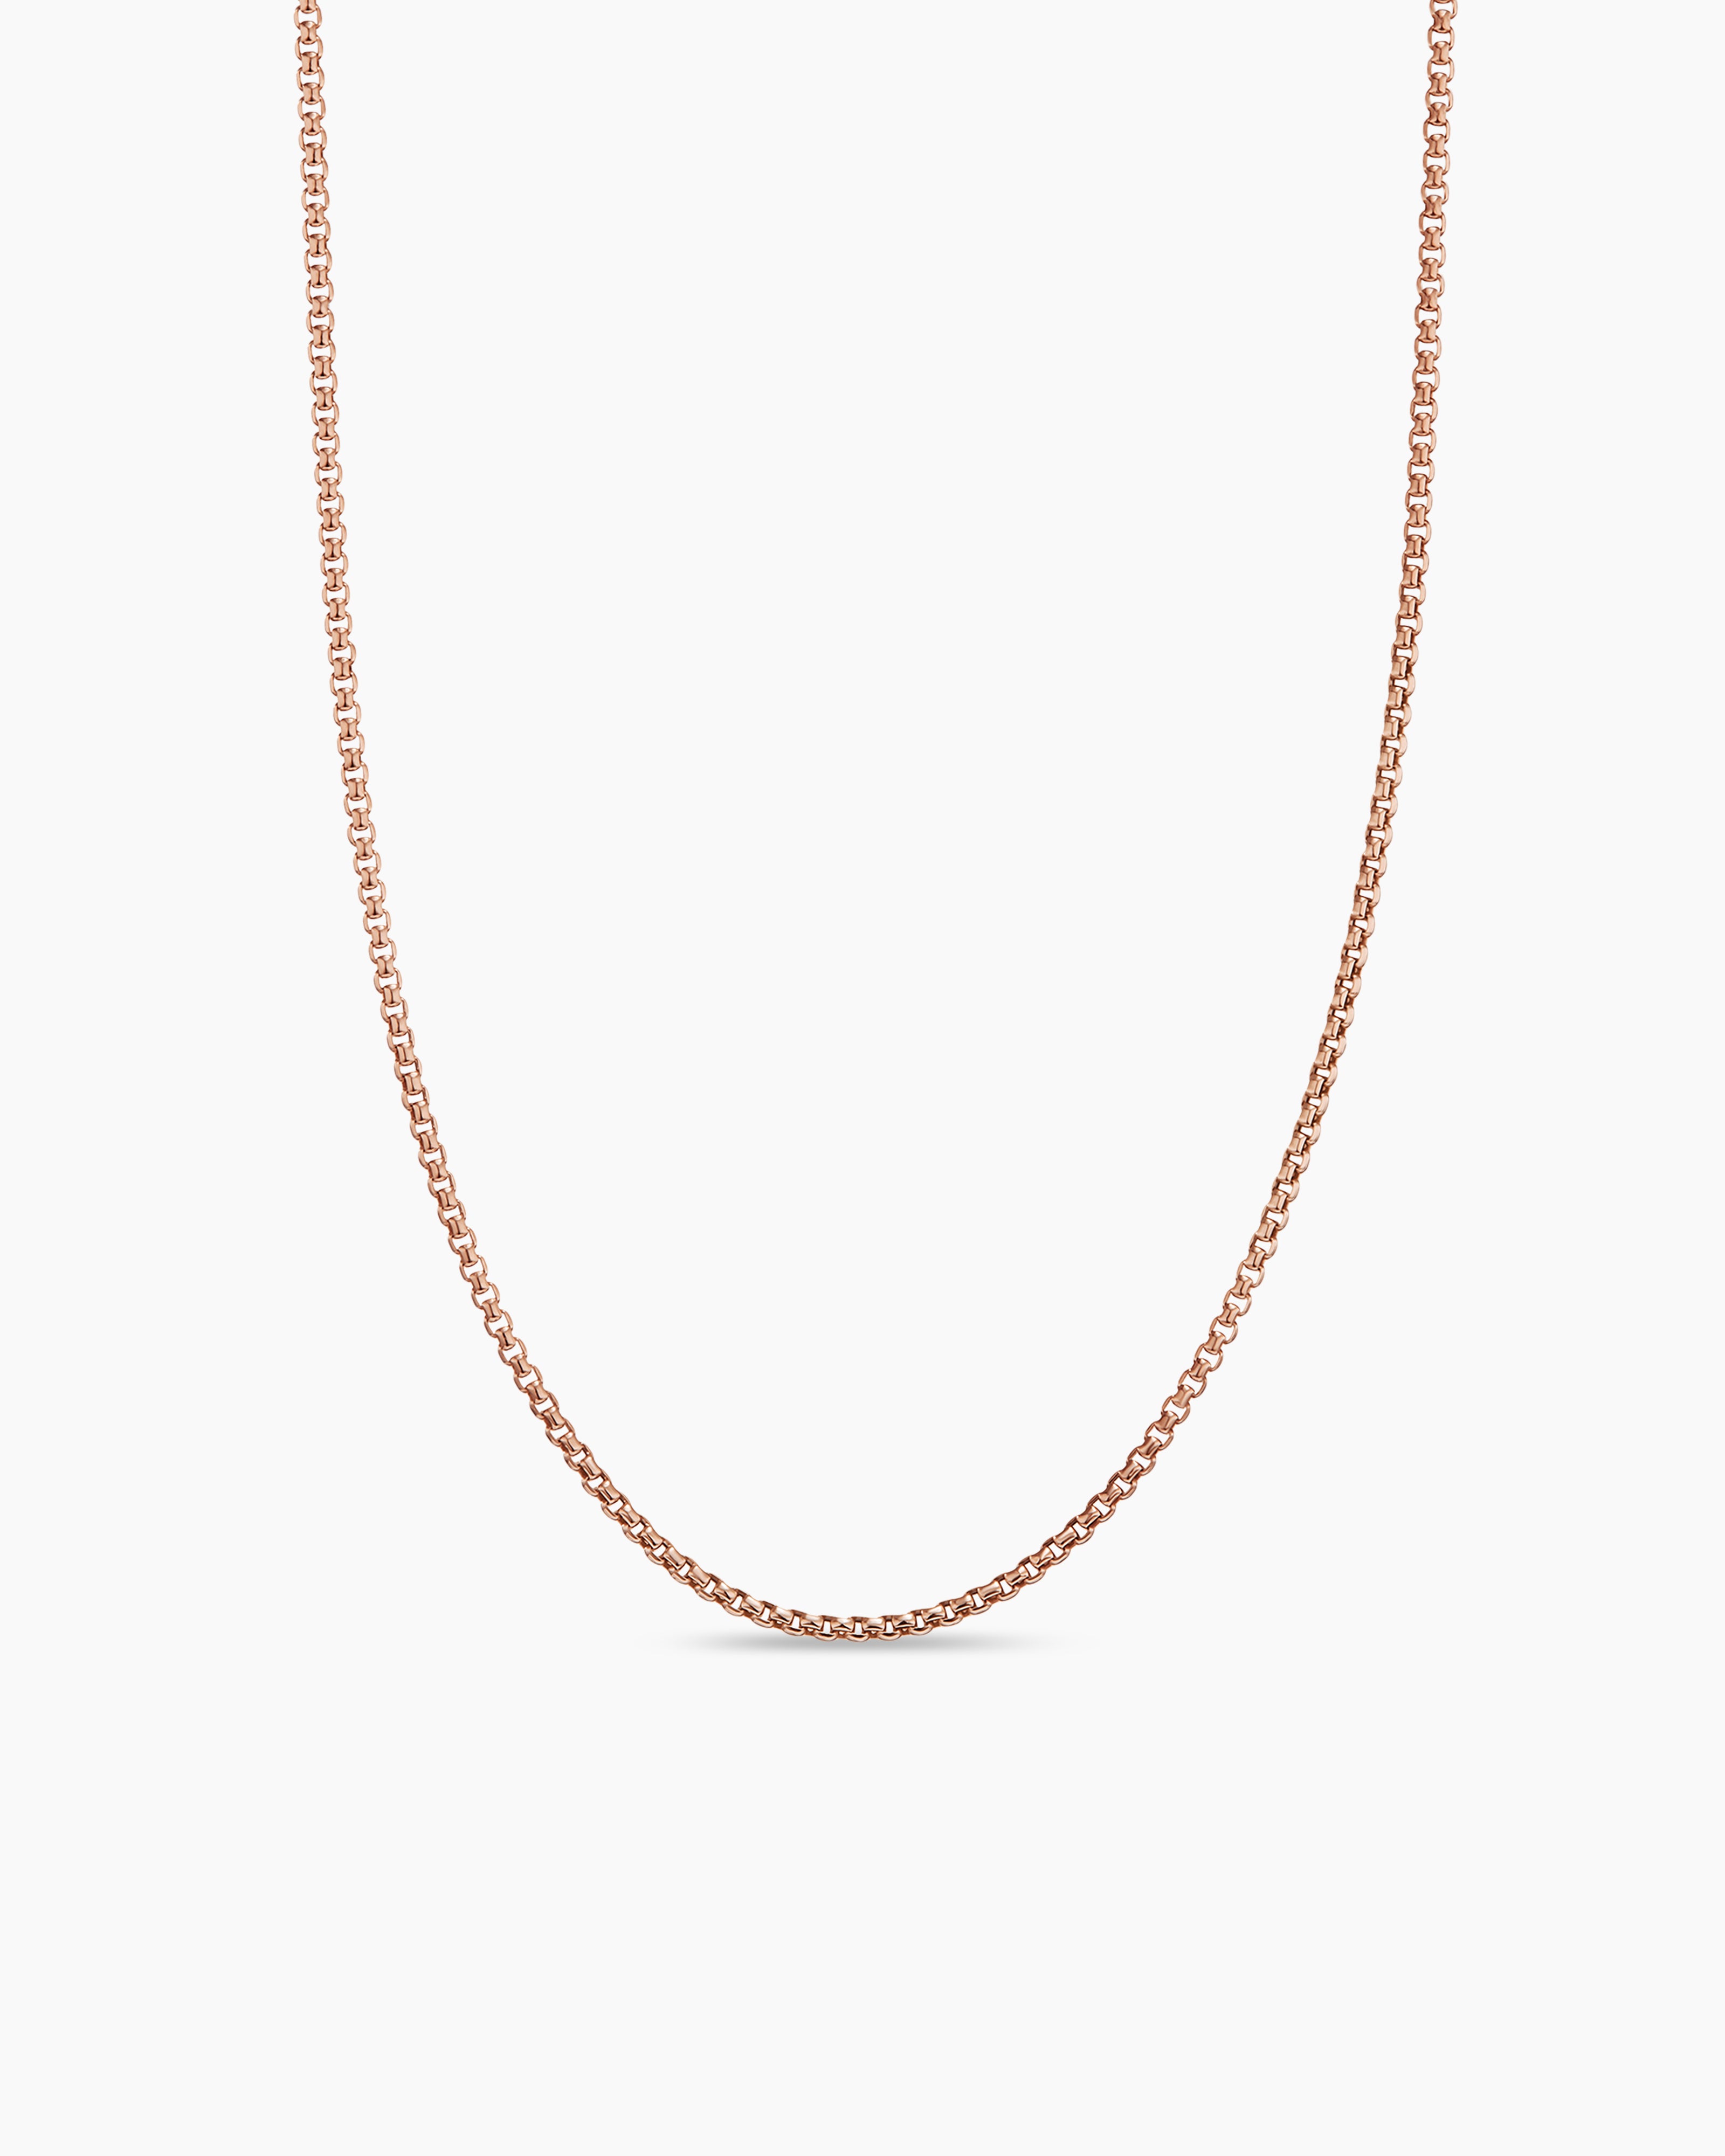 Mens Box Chain Necklace in 18K Rose Gold, 1.7mm